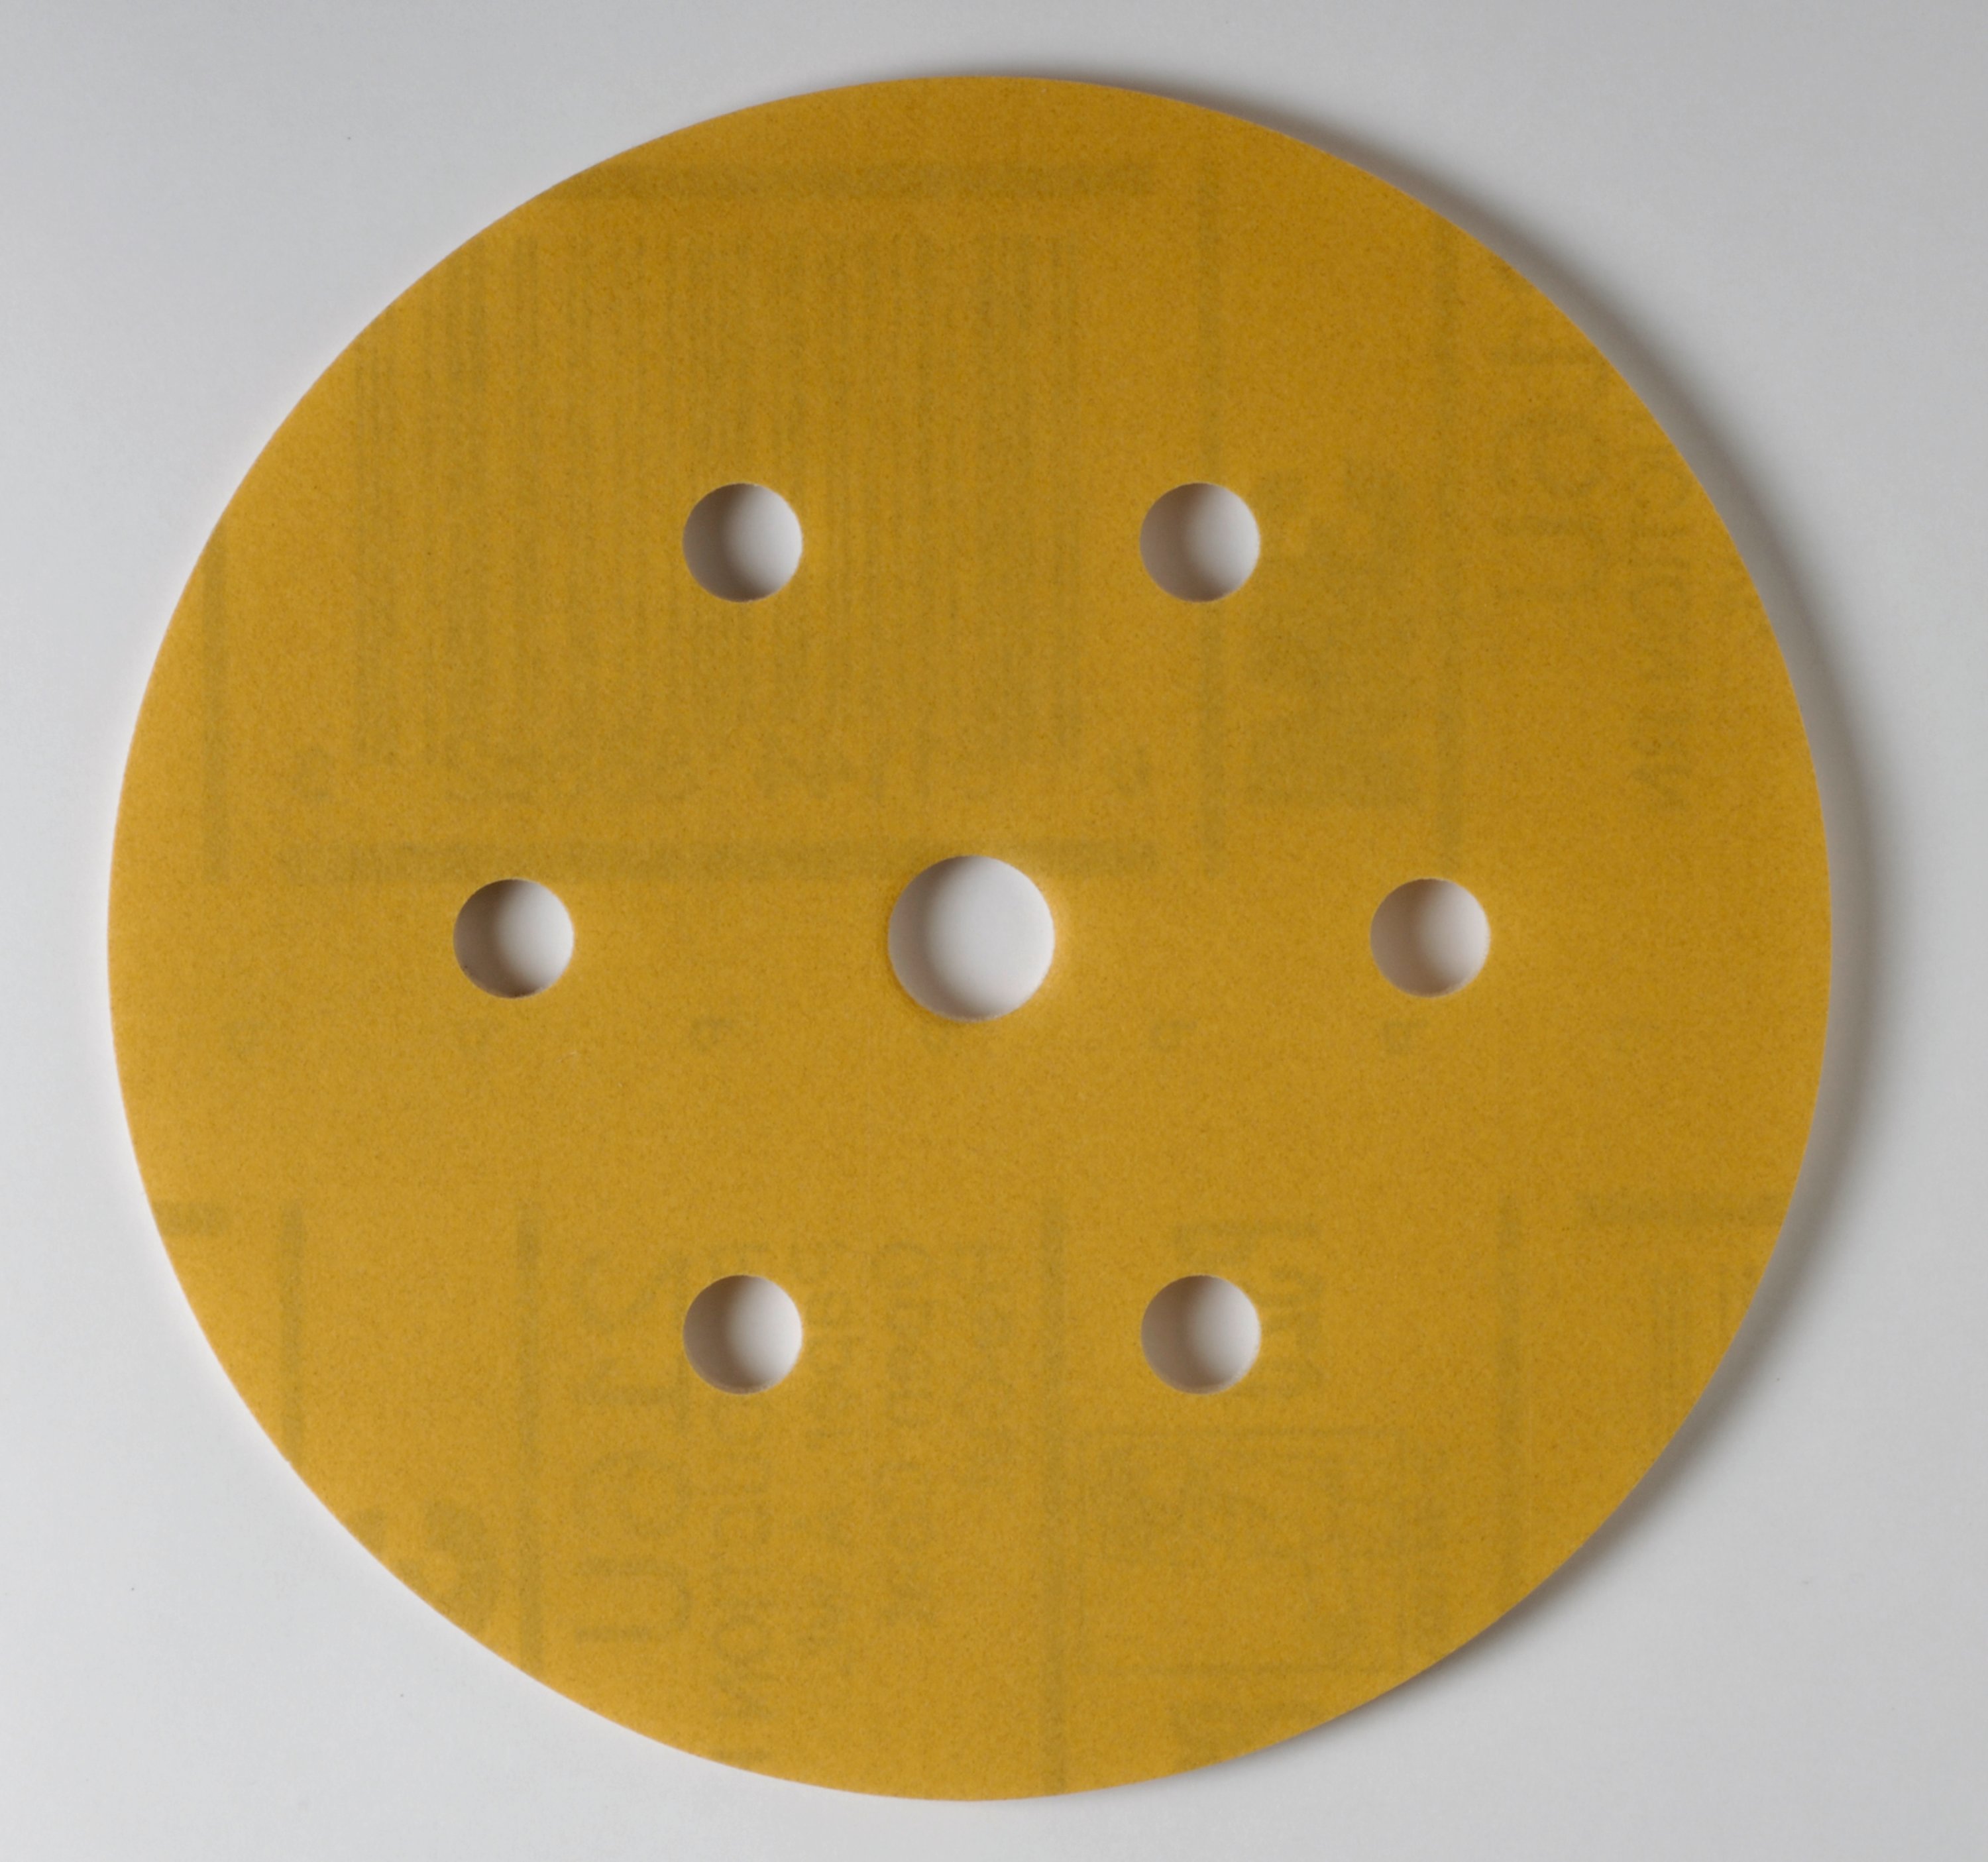 3M offers a complete line of hook-and-loop style Hookit™  discs for work spaces where adhesive backed discs may become contaminated by dust, dirt, or flying debris